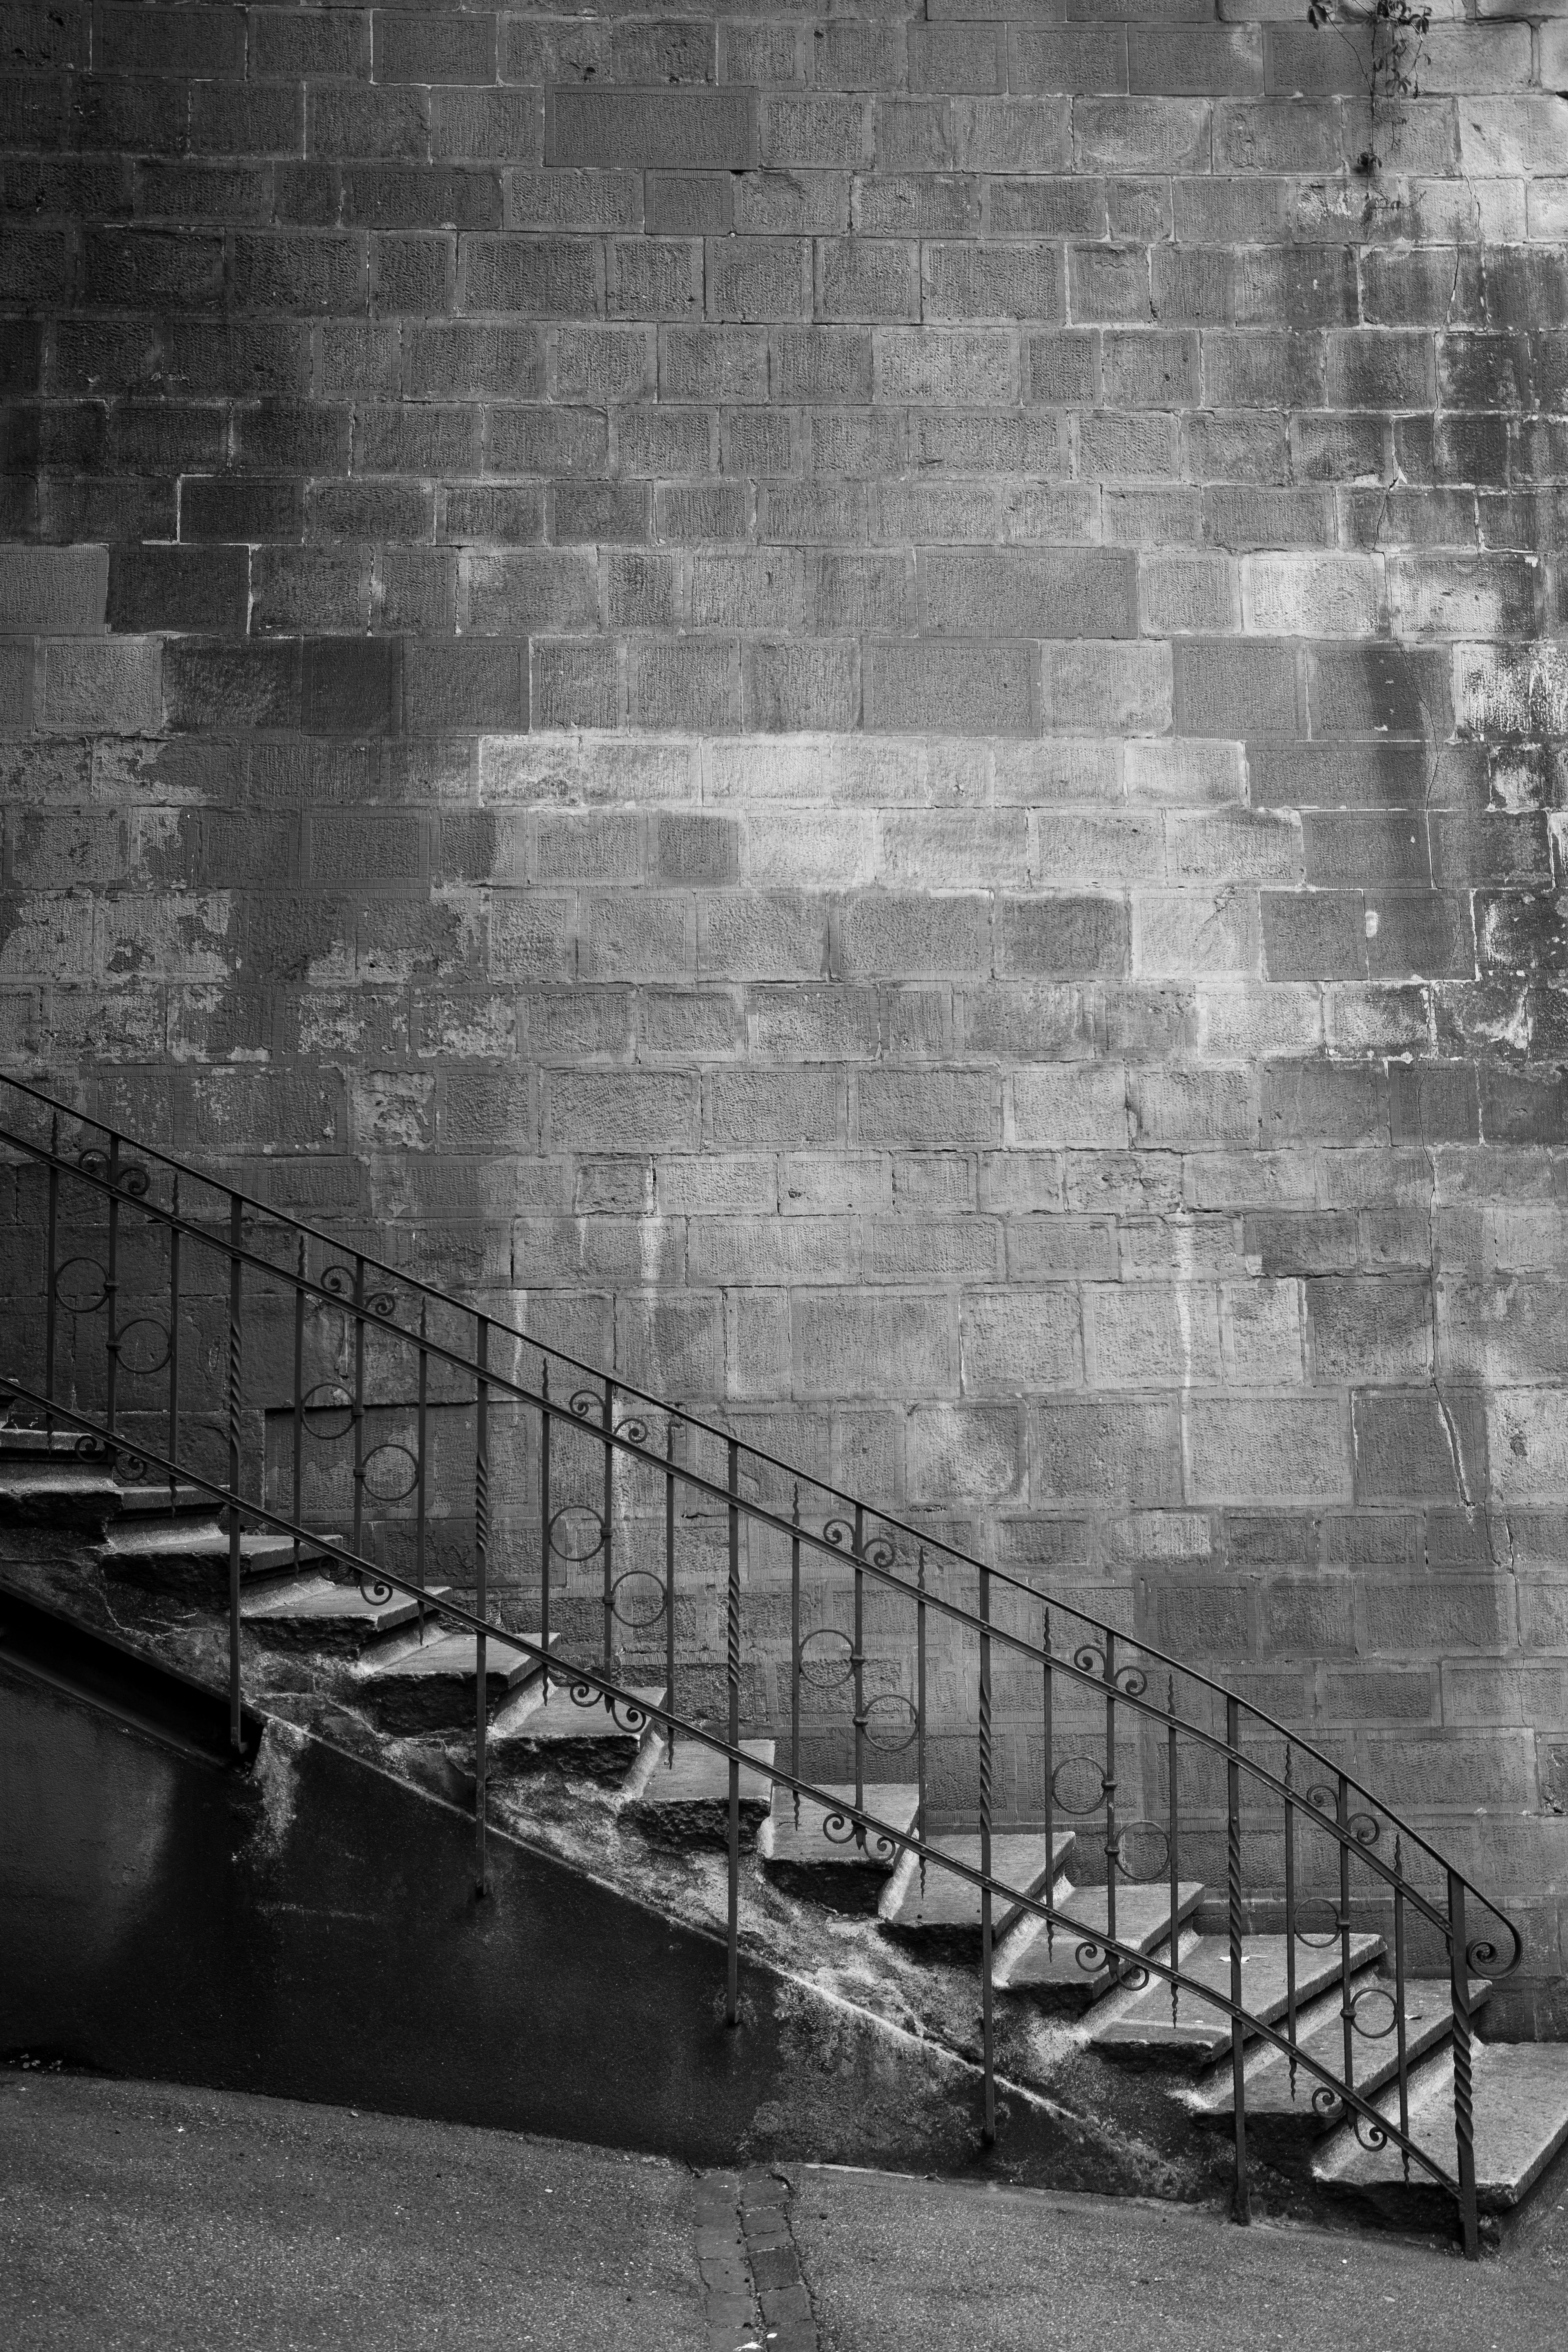 miscellanea, miscellaneous, wall, bw, chb, stairs, ladder, railings, handrail, brick for android